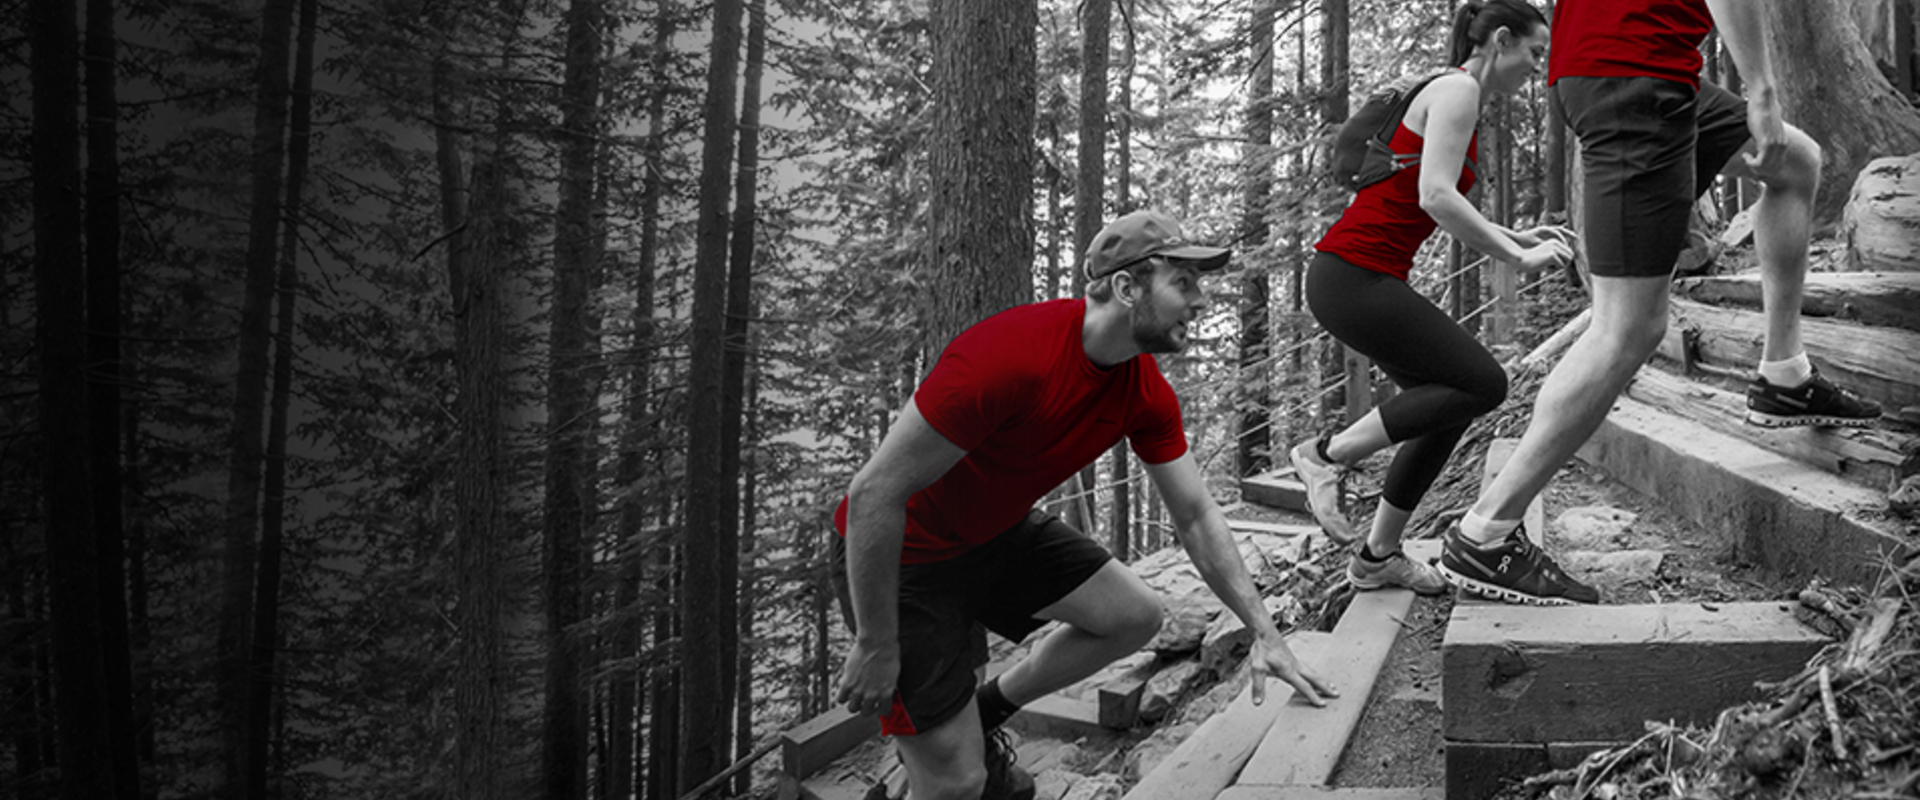 Join us for Grouse Grind Mountain Run to celebrate the Grind season